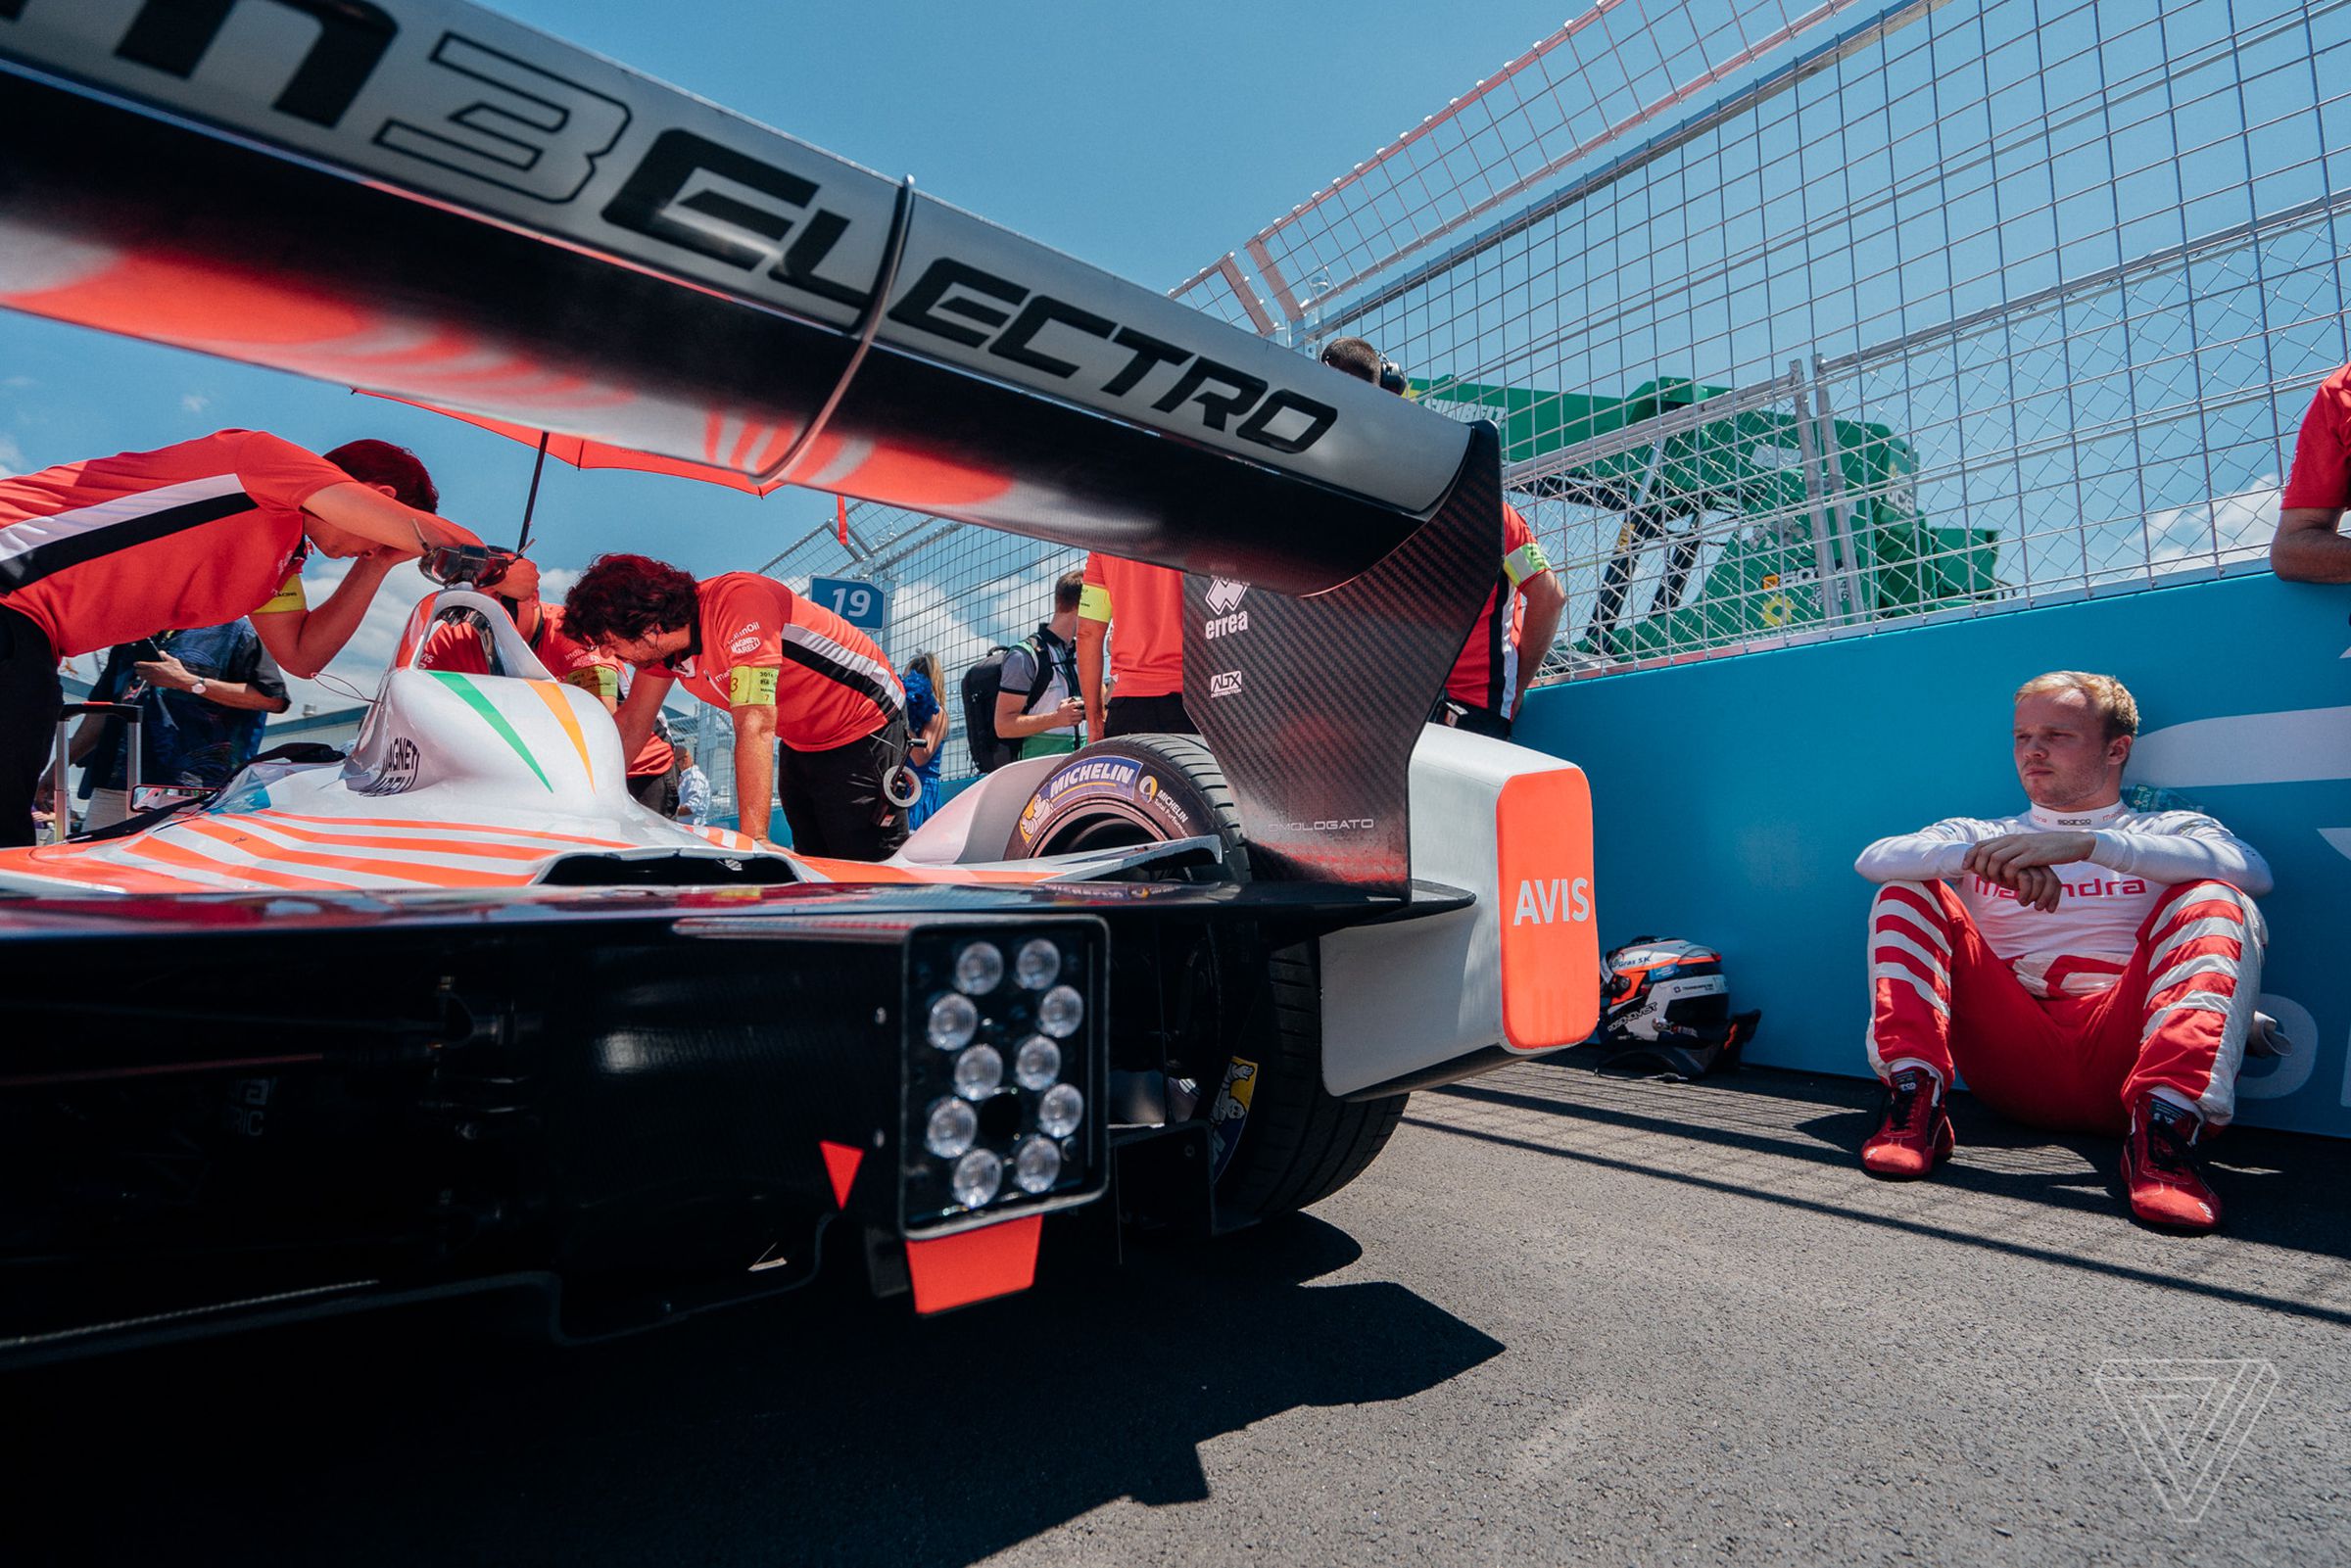 Mahindra driver Felix Rosenqvist rests while his team makes final preparations for the race. Rosenqvist and his teammate Nick Heidfeled finished second and third in Sunday’s race, respectively.